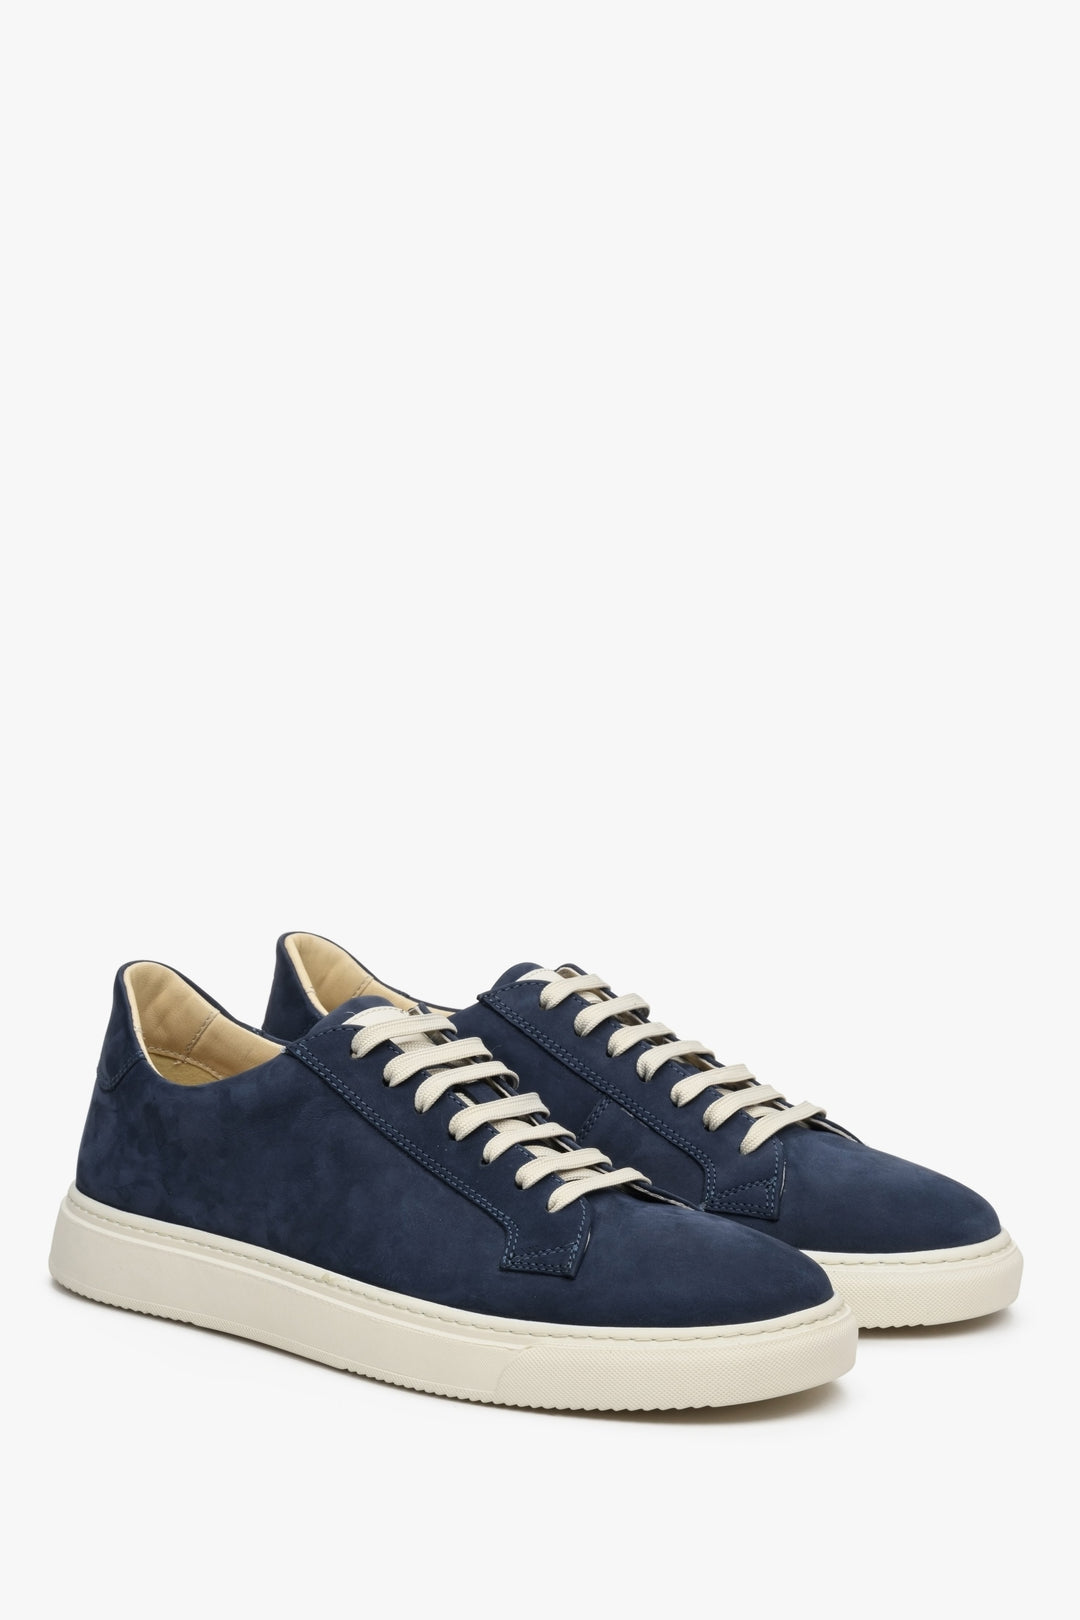 Men's Estro nubuck sneakers in navy blue - presentation of the top of the shoe and the side seam.